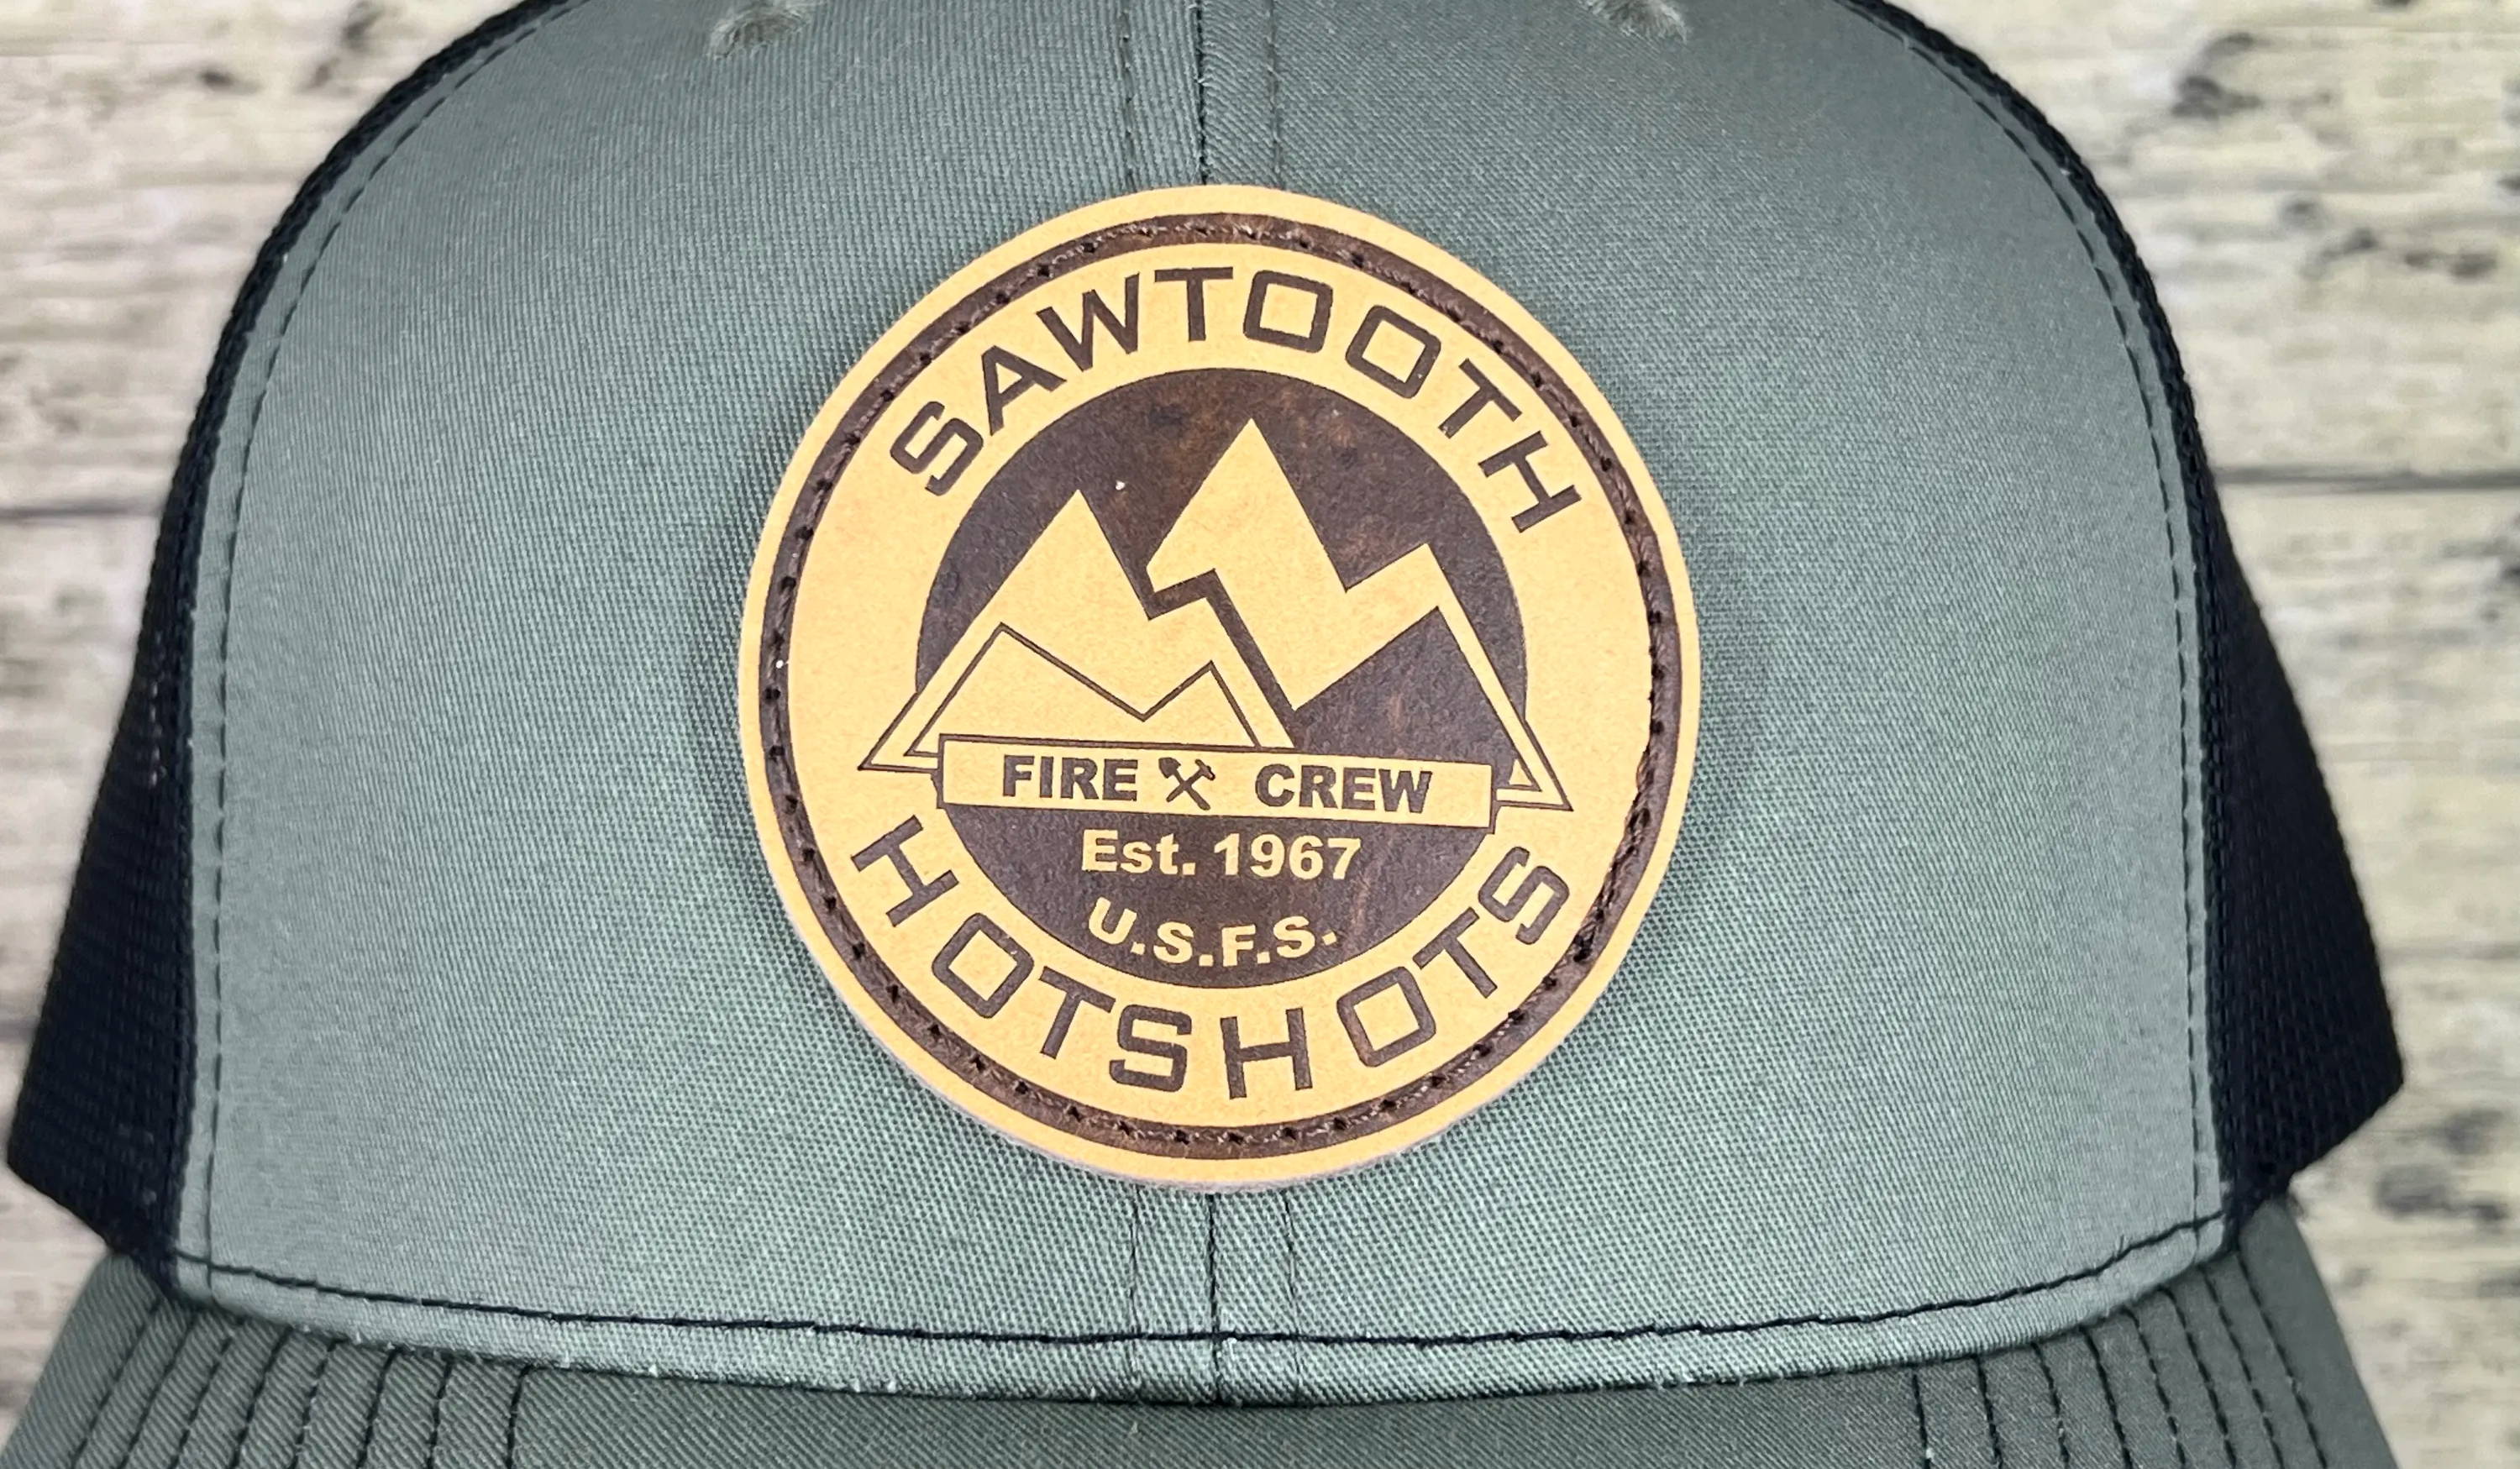 Patch sewn on hat